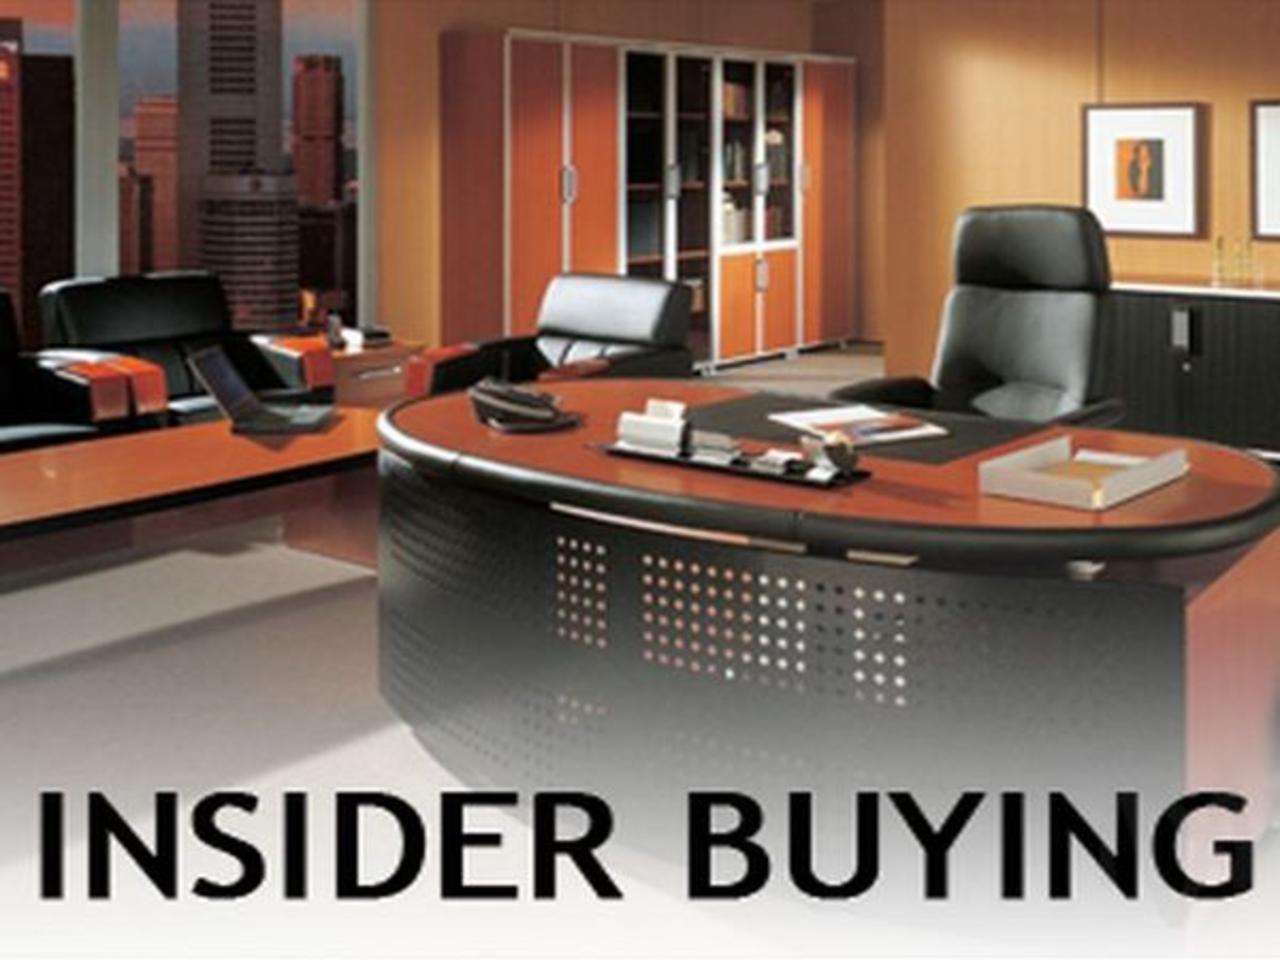 Tuesday 11/16 Insider Buying Report: HFC, ATEC